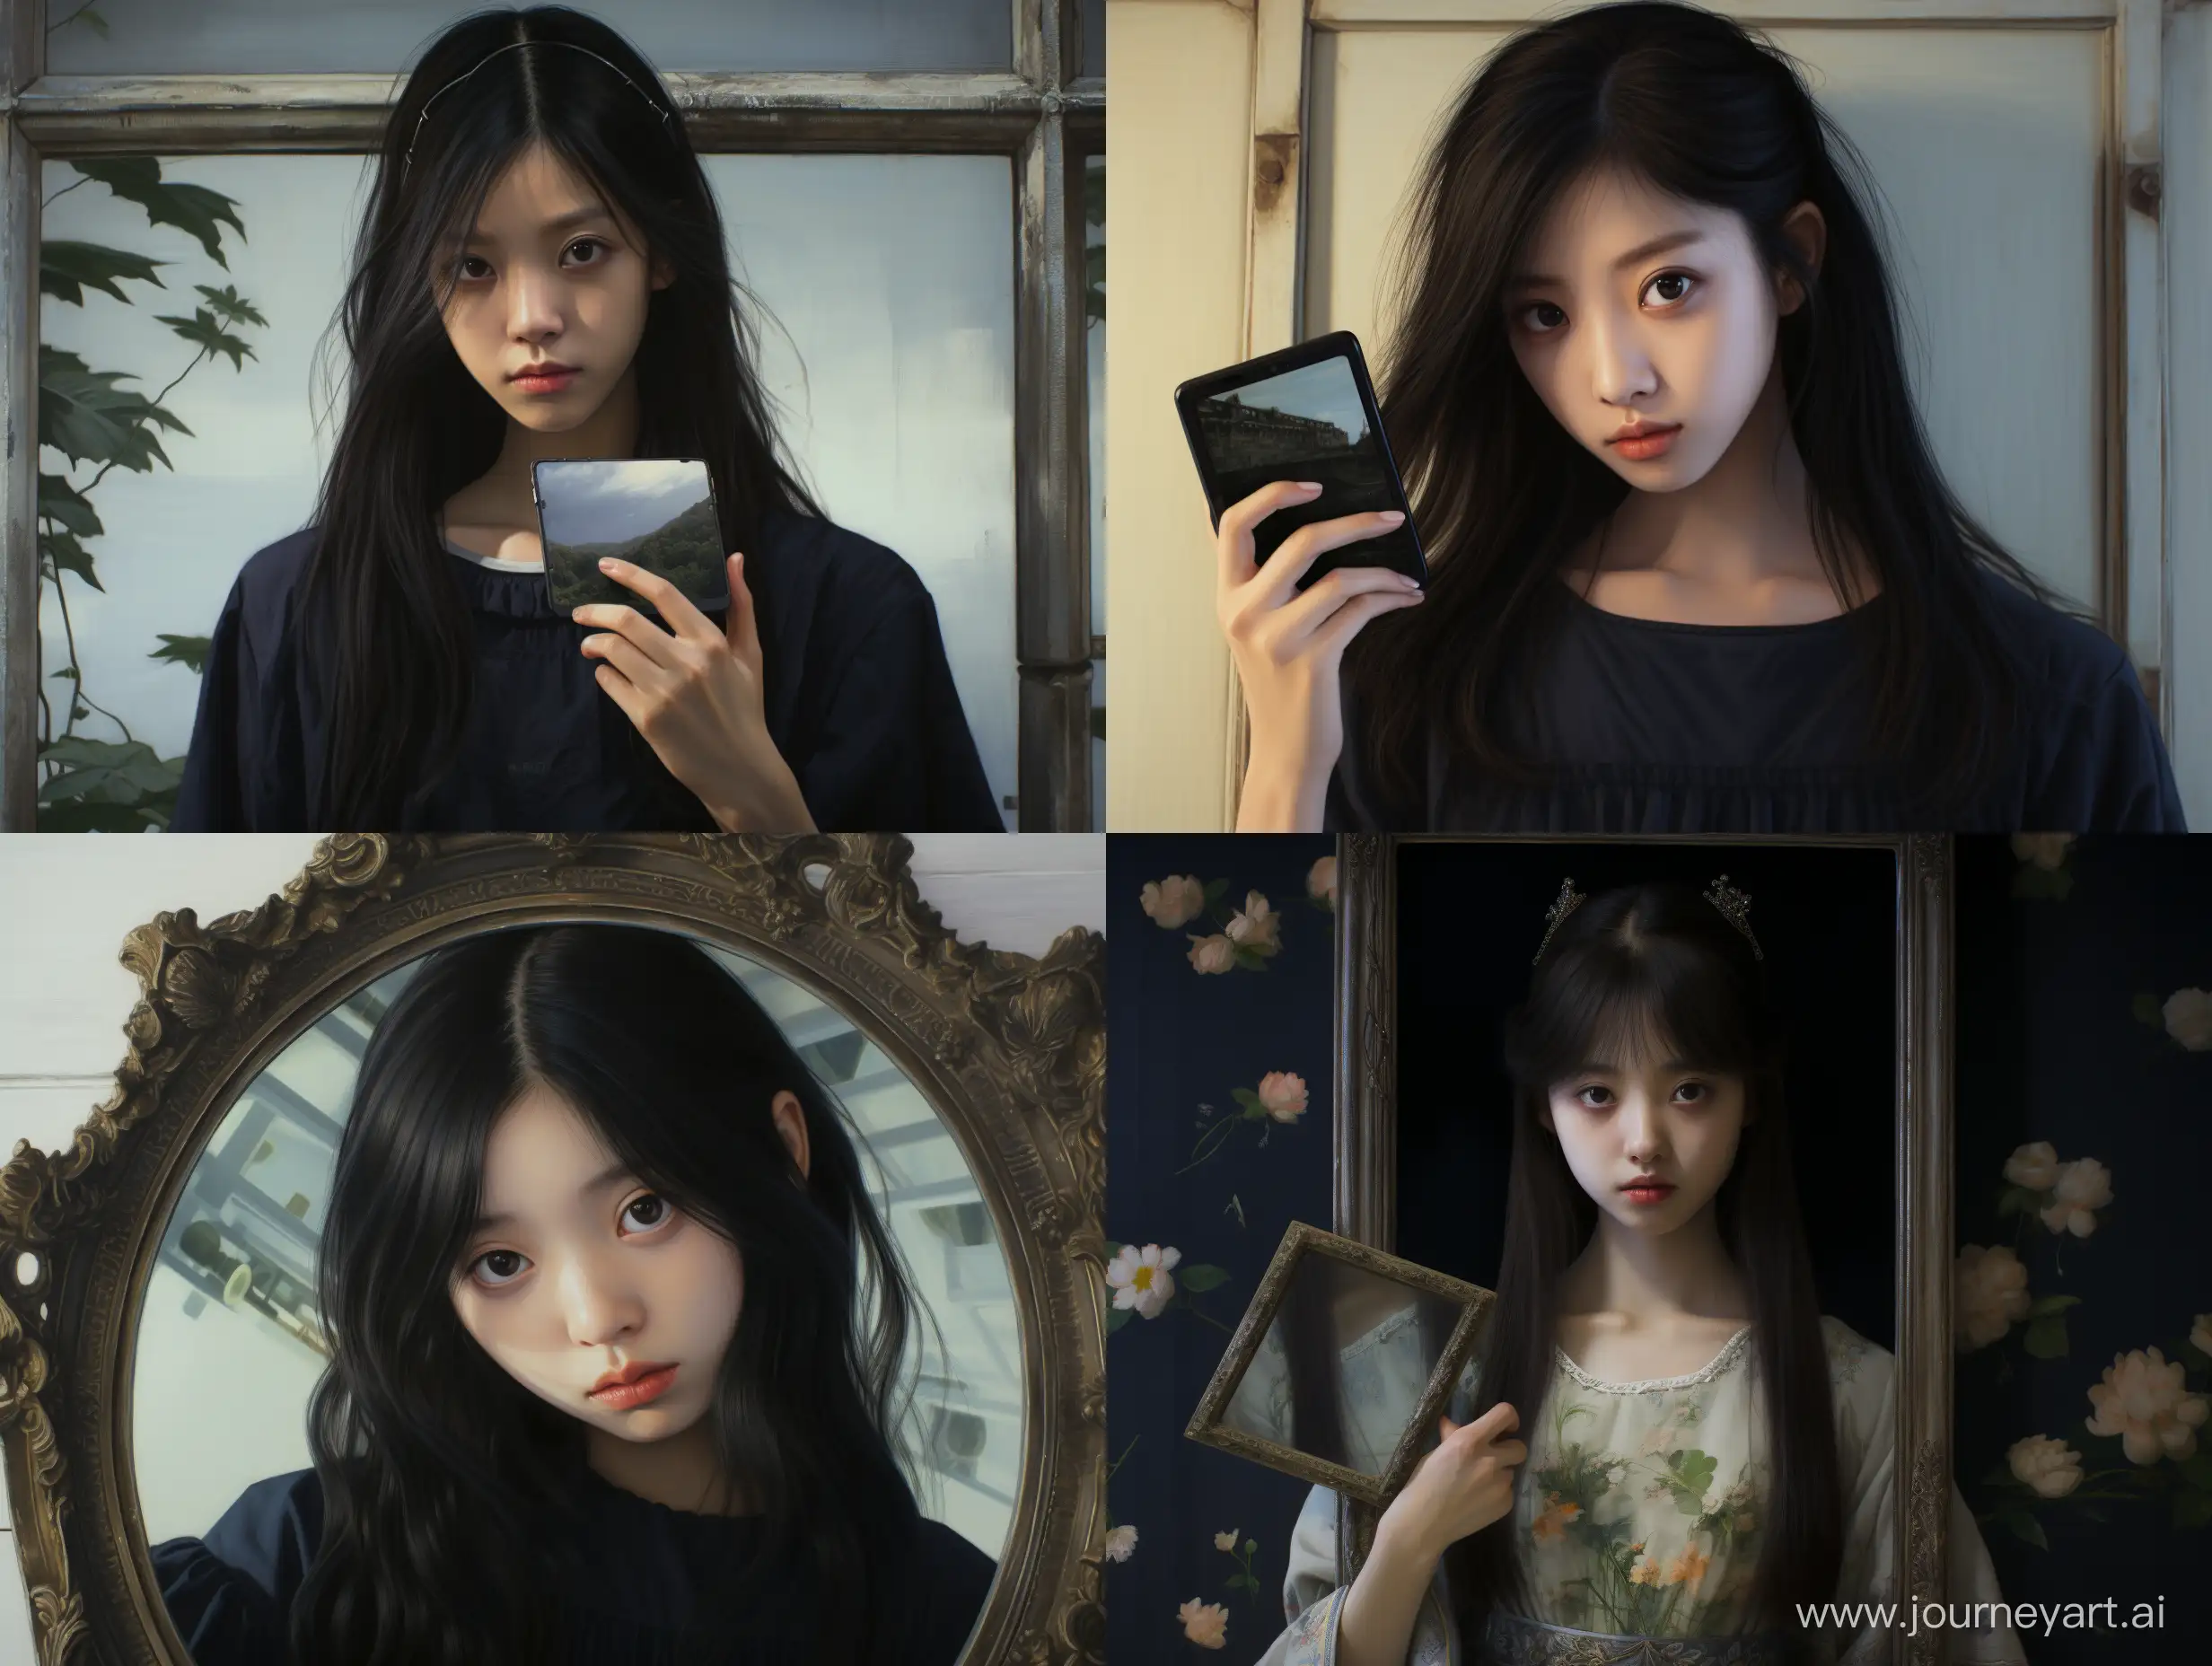 Hyper realistic image of a black haired 16 year old japanese girl mirror selfie